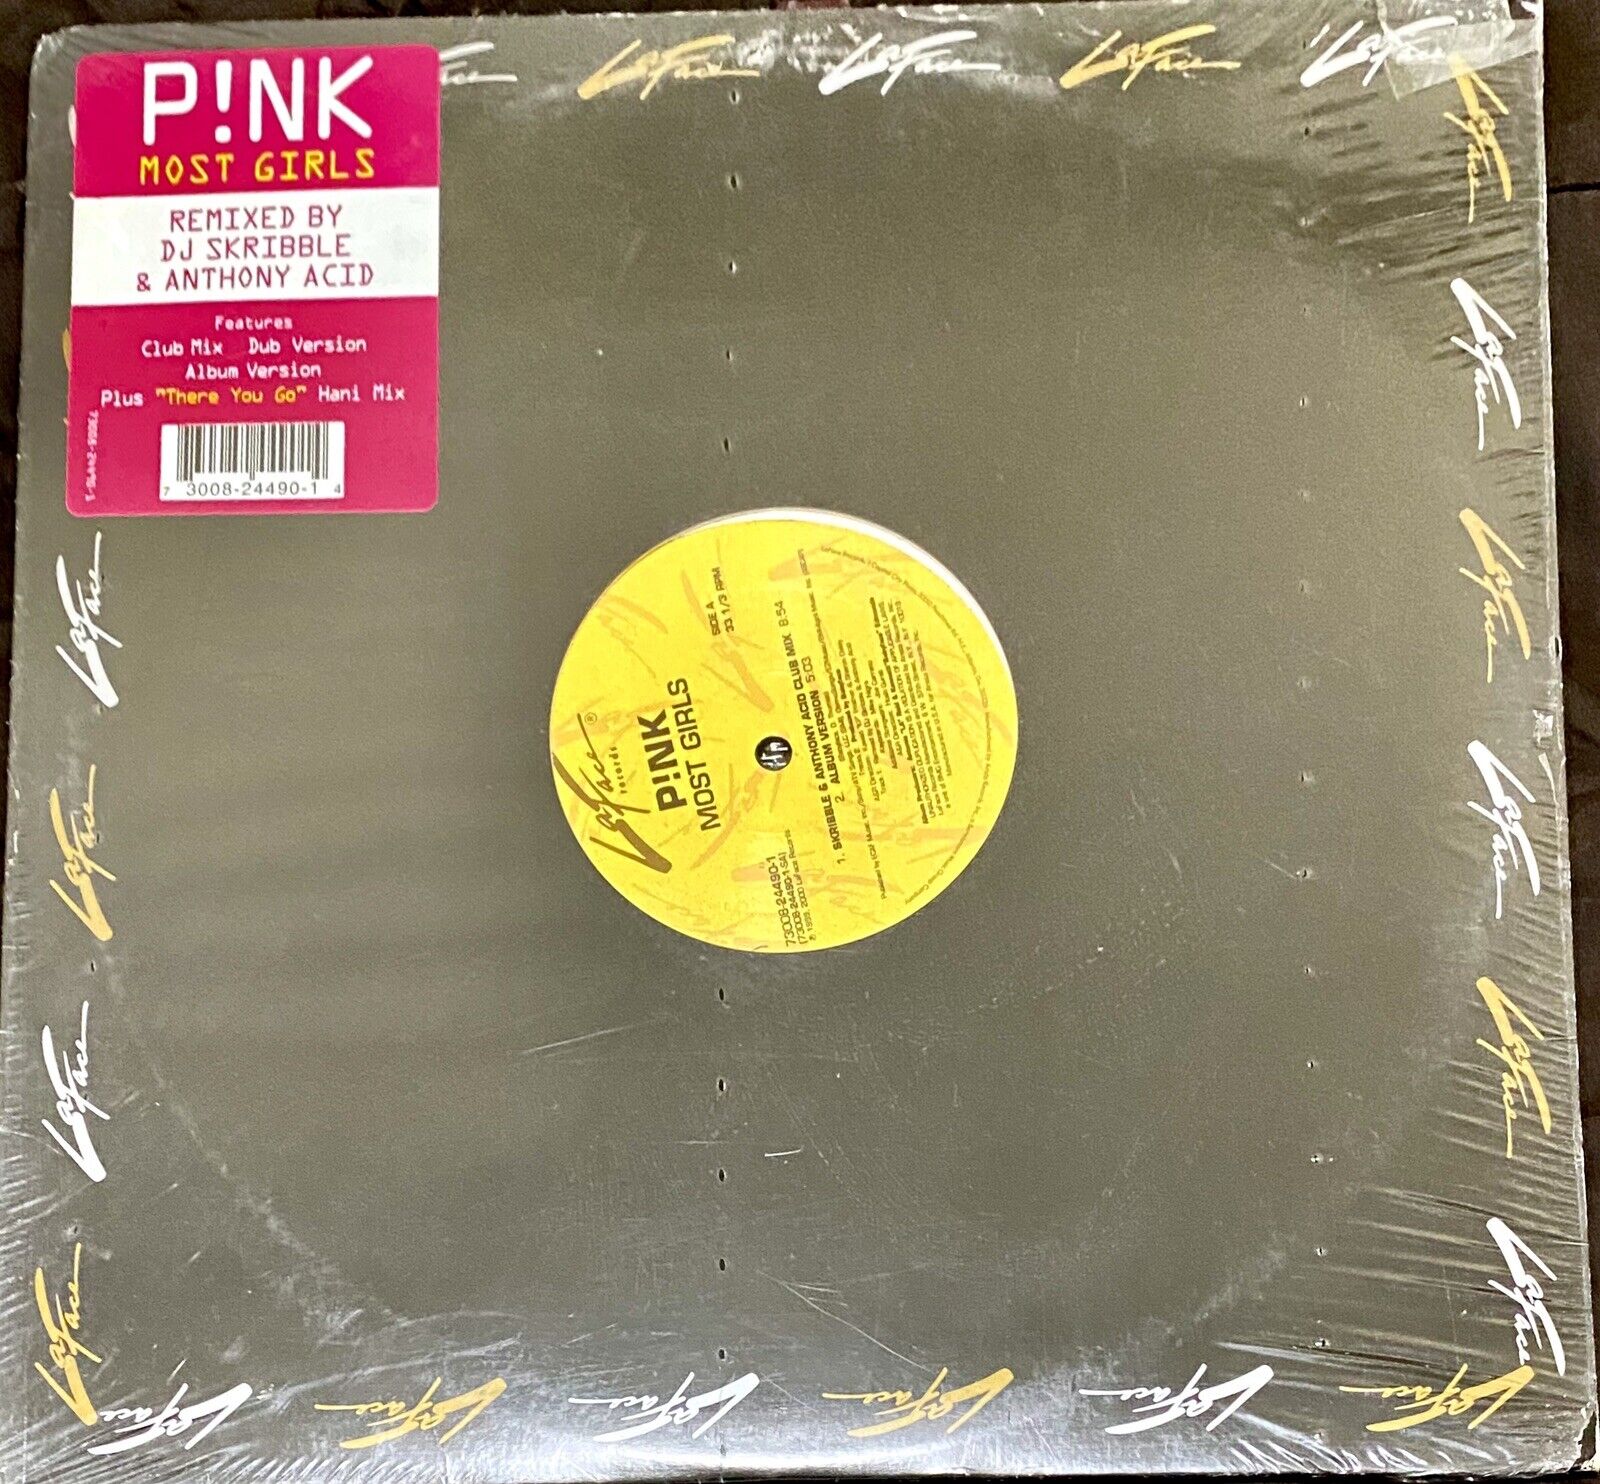 PINK "MOST GIRLS" & "THERE YOU GO" VINYL 12" SINGLE ORIGINAL 2000 LAFACE RECORDS